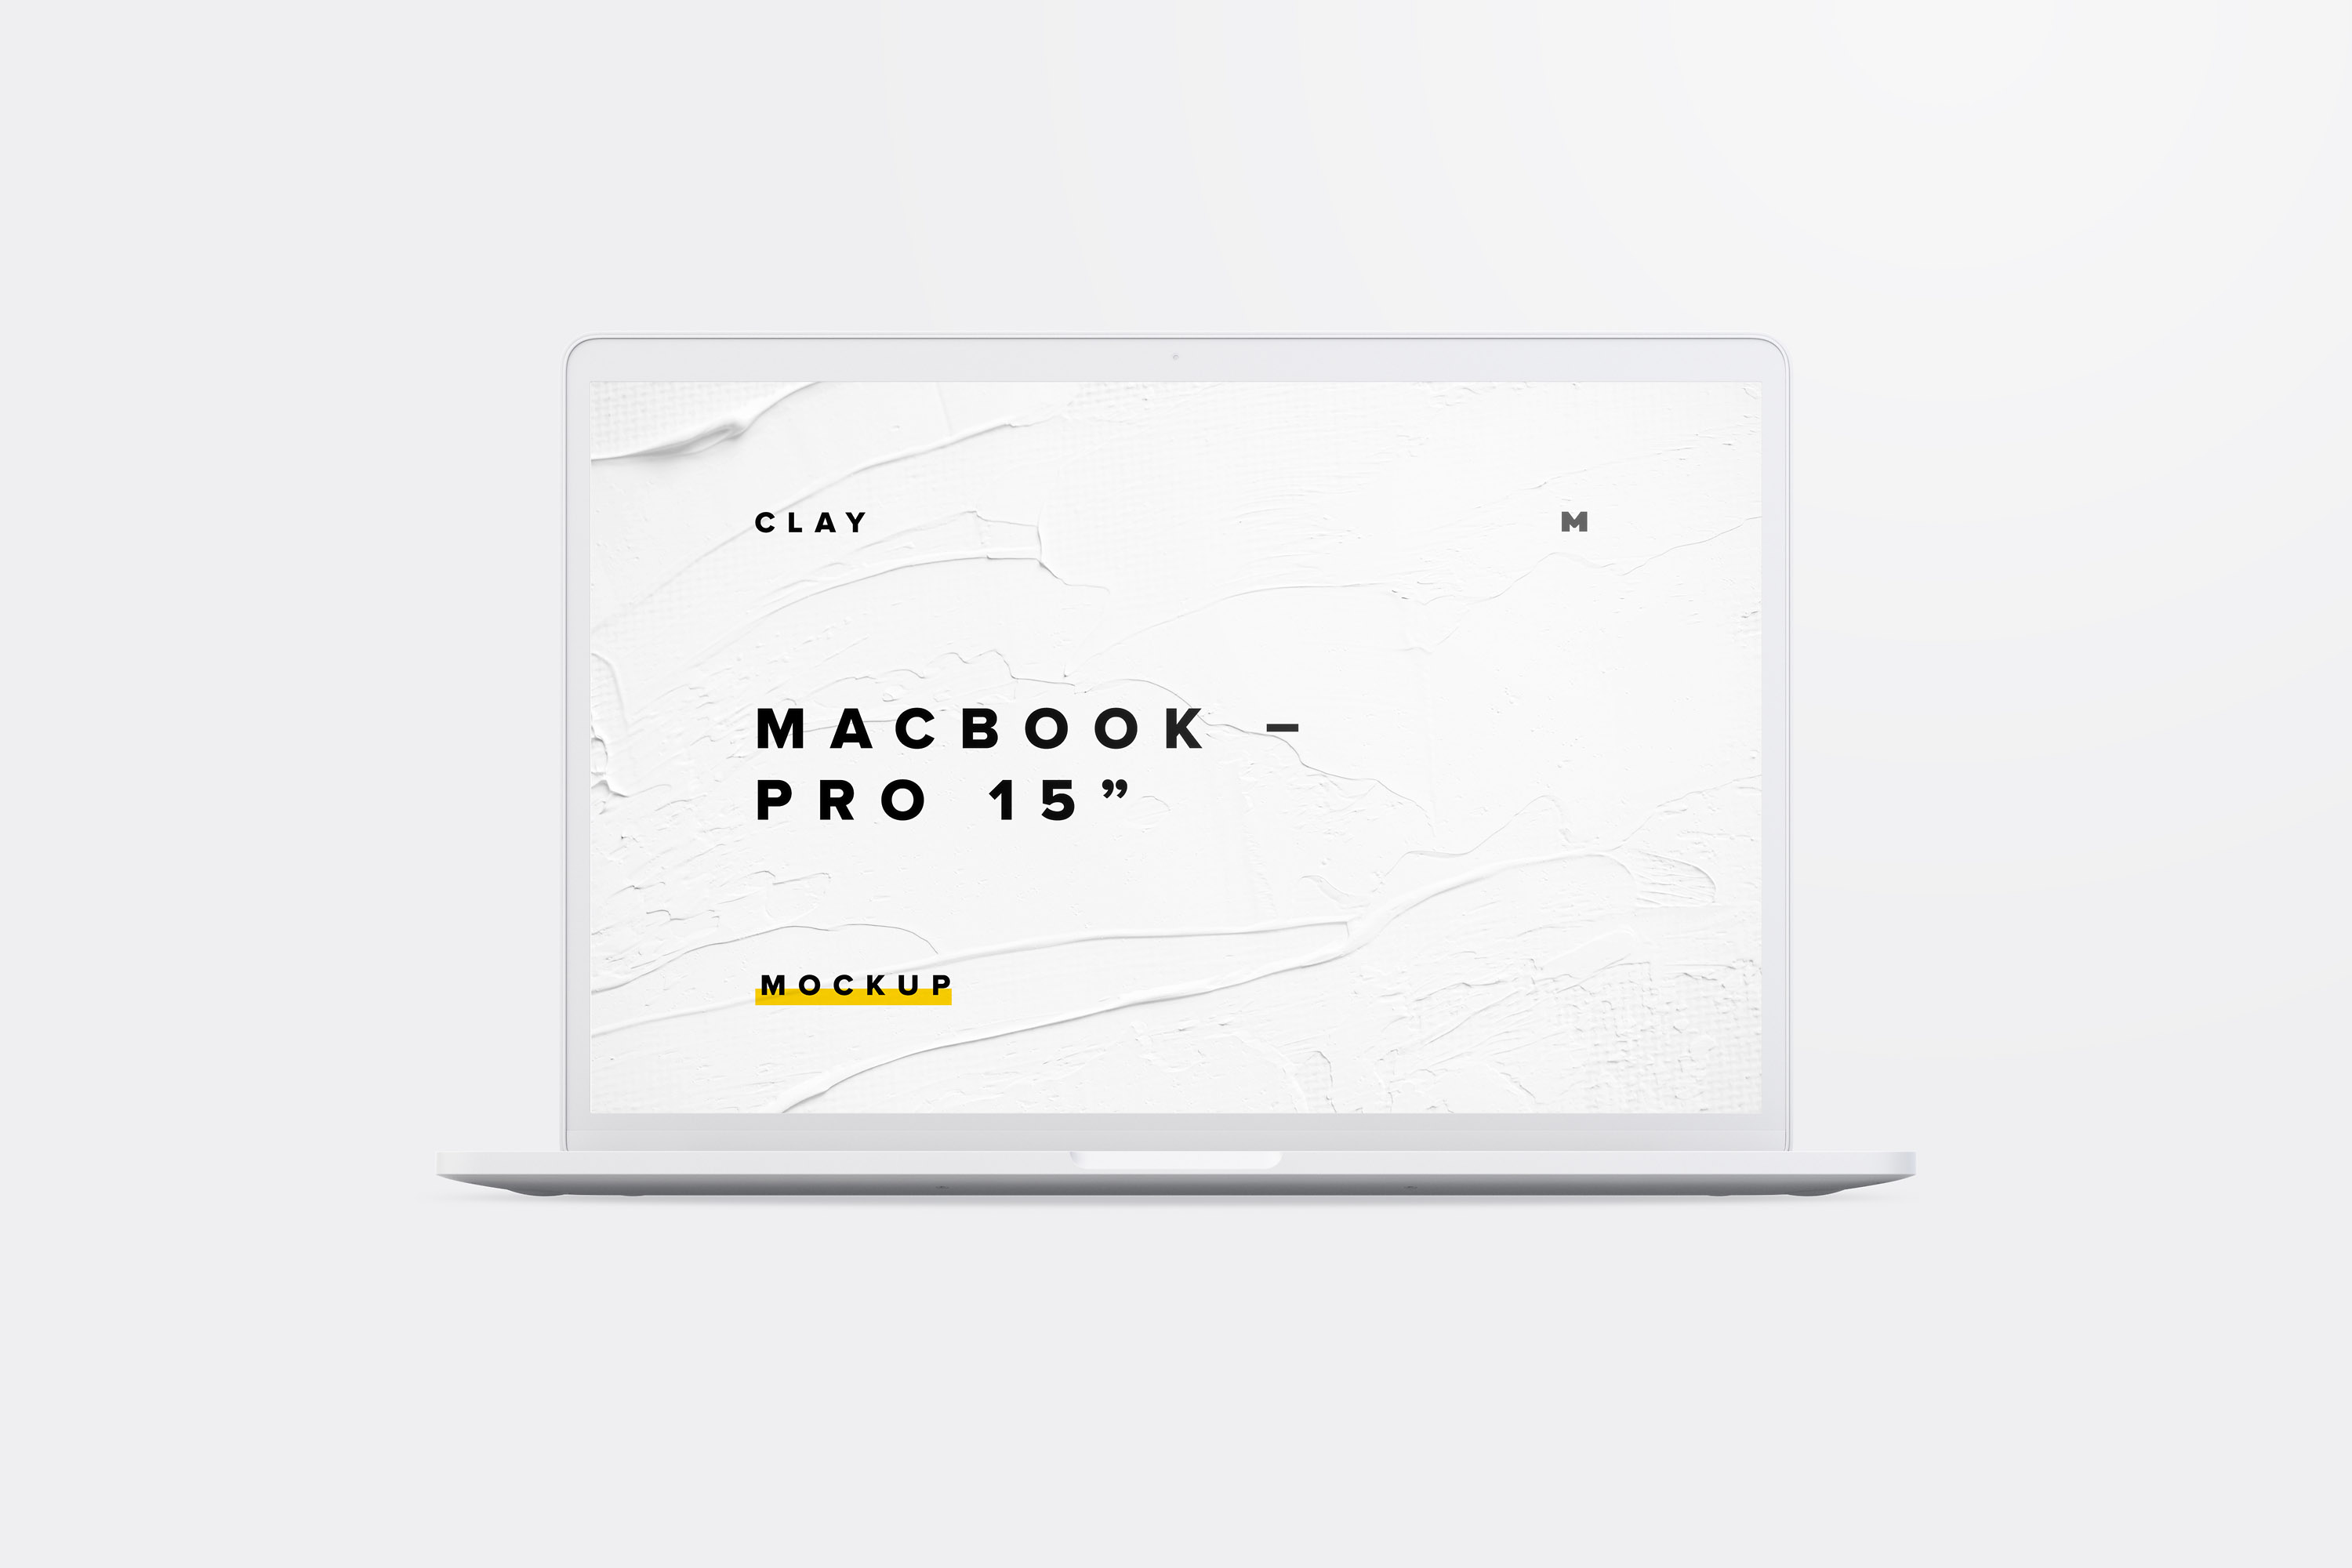 MacBook Pro高端笔记本电脑UI设计效果图前视图样机 Clay MacBook Pro 15" with Touch Bar, Front View Mockup插图